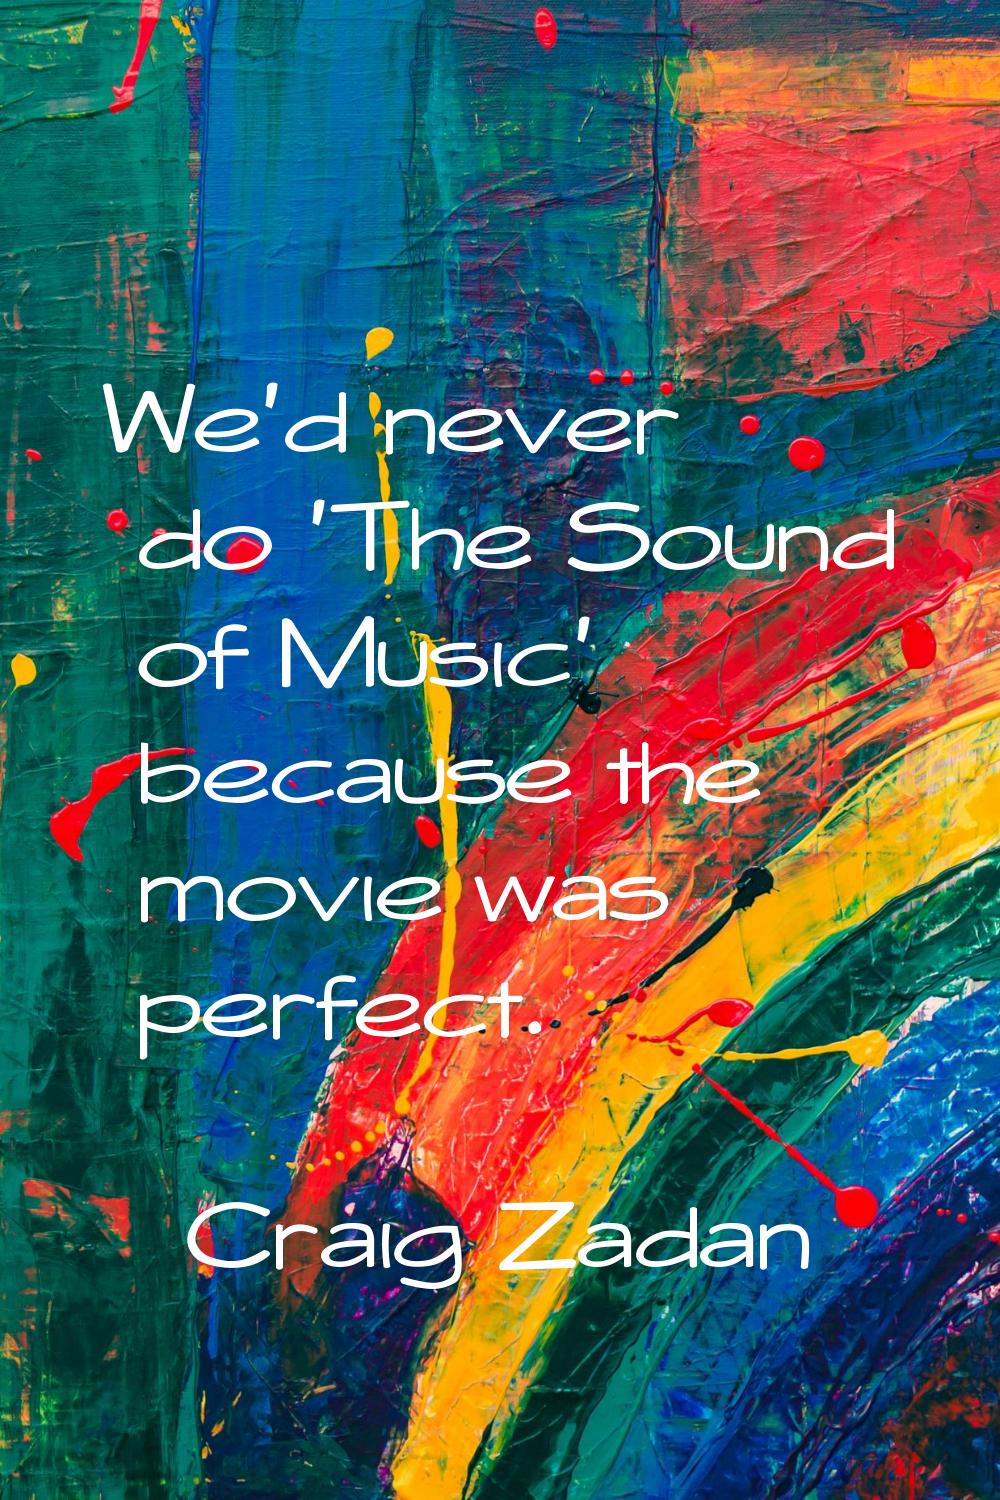 We'd never do 'The Sound of Music' because the movie was perfect.